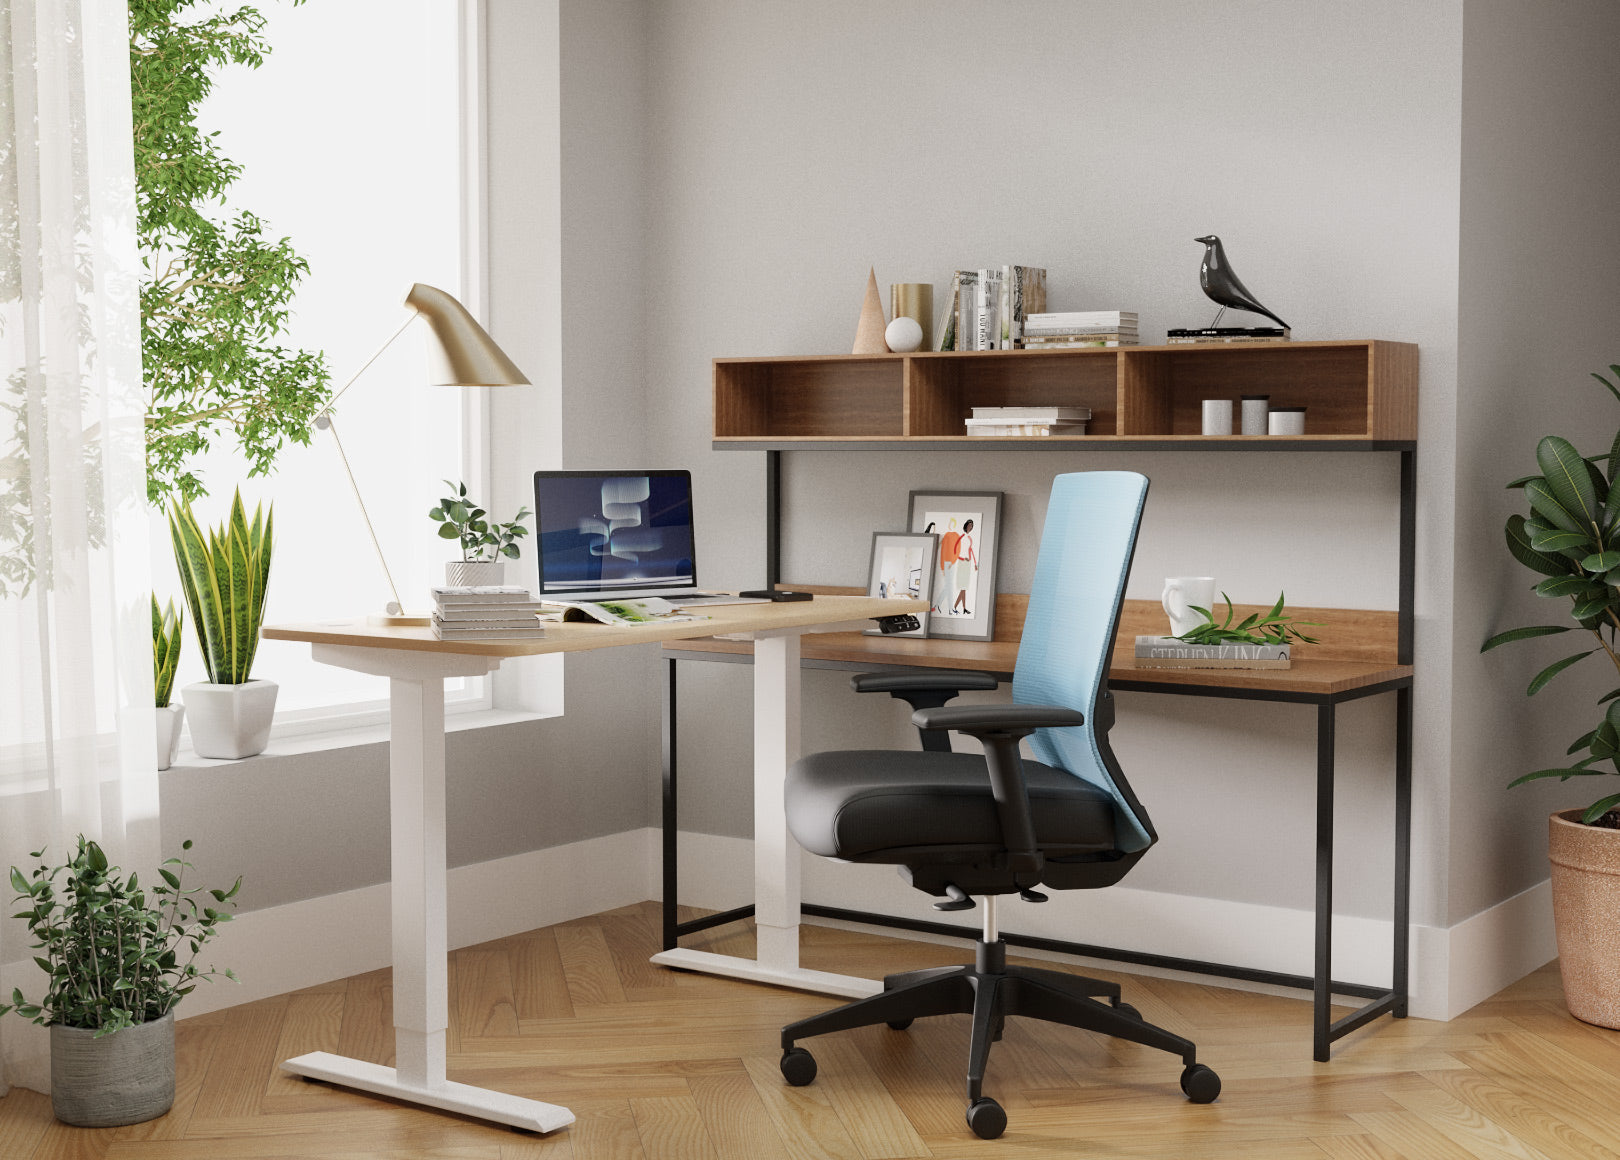 Home office worker using Sunaofe Elite67 mesh chair with lumbar support and adjustable seat depth and height